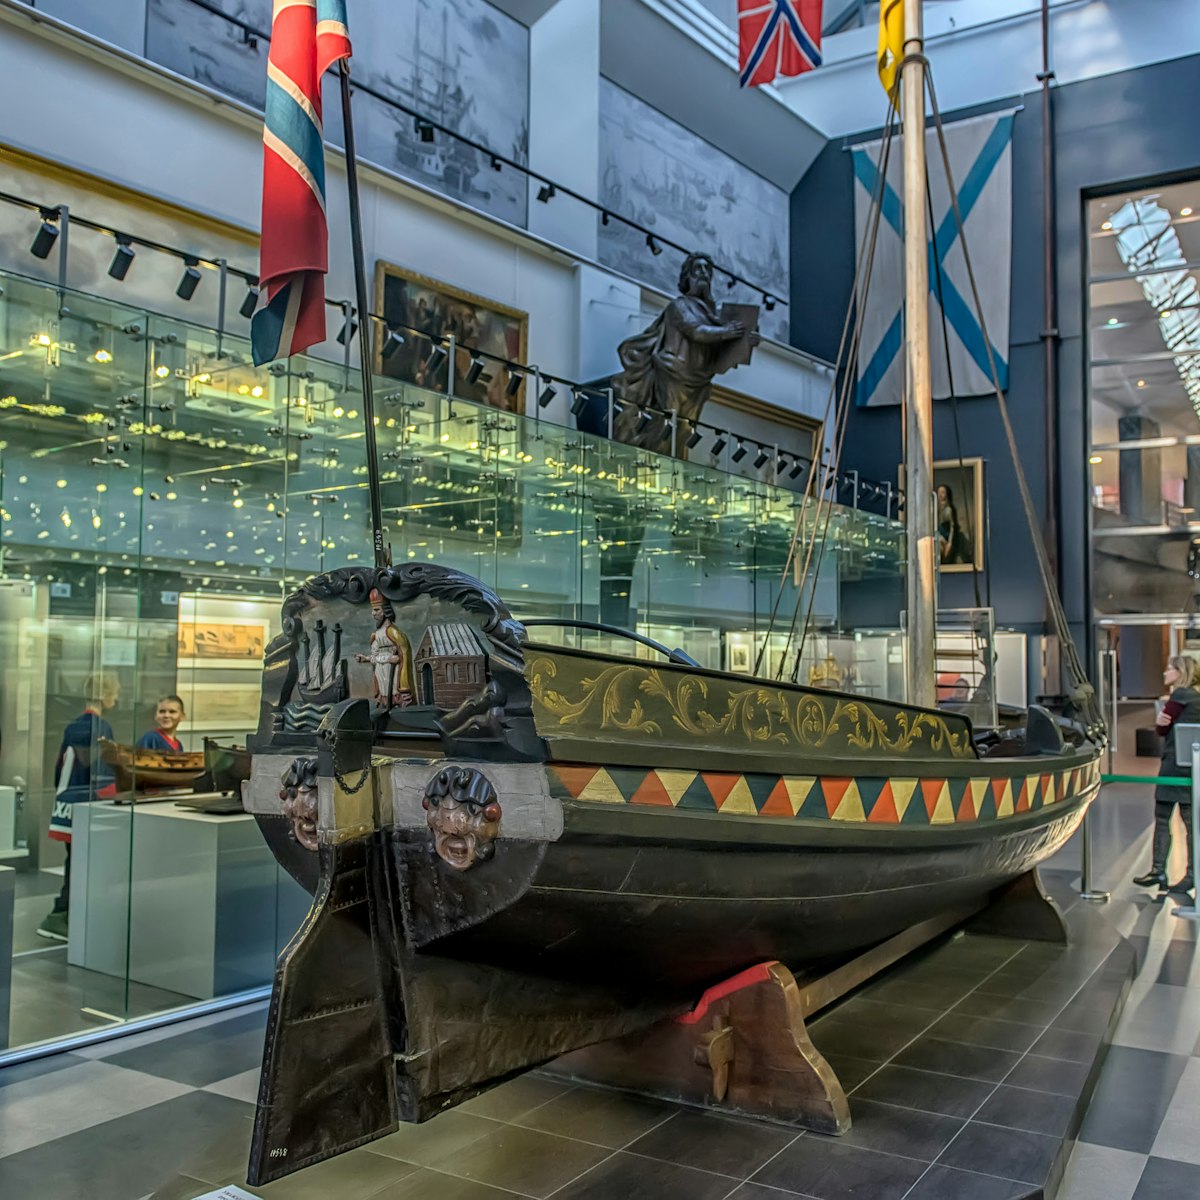 The Central Naval Museum is one of the oldest museums in Russia and one of the largest maritime museums in the world, located in St. Petersburg.